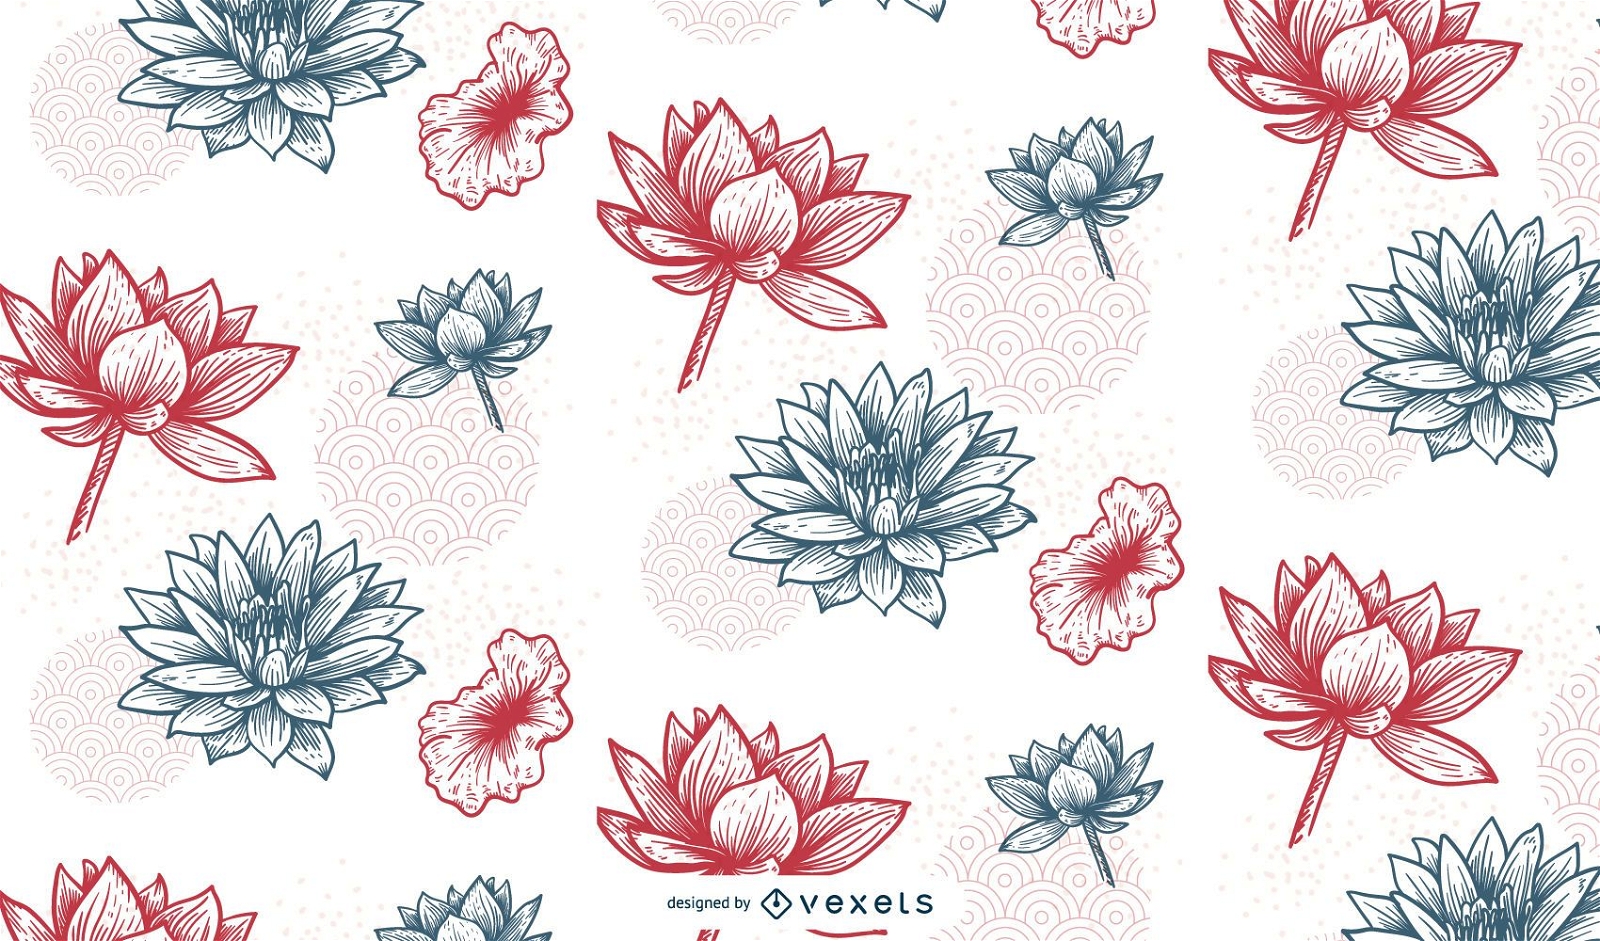 Chinese floral pattern design